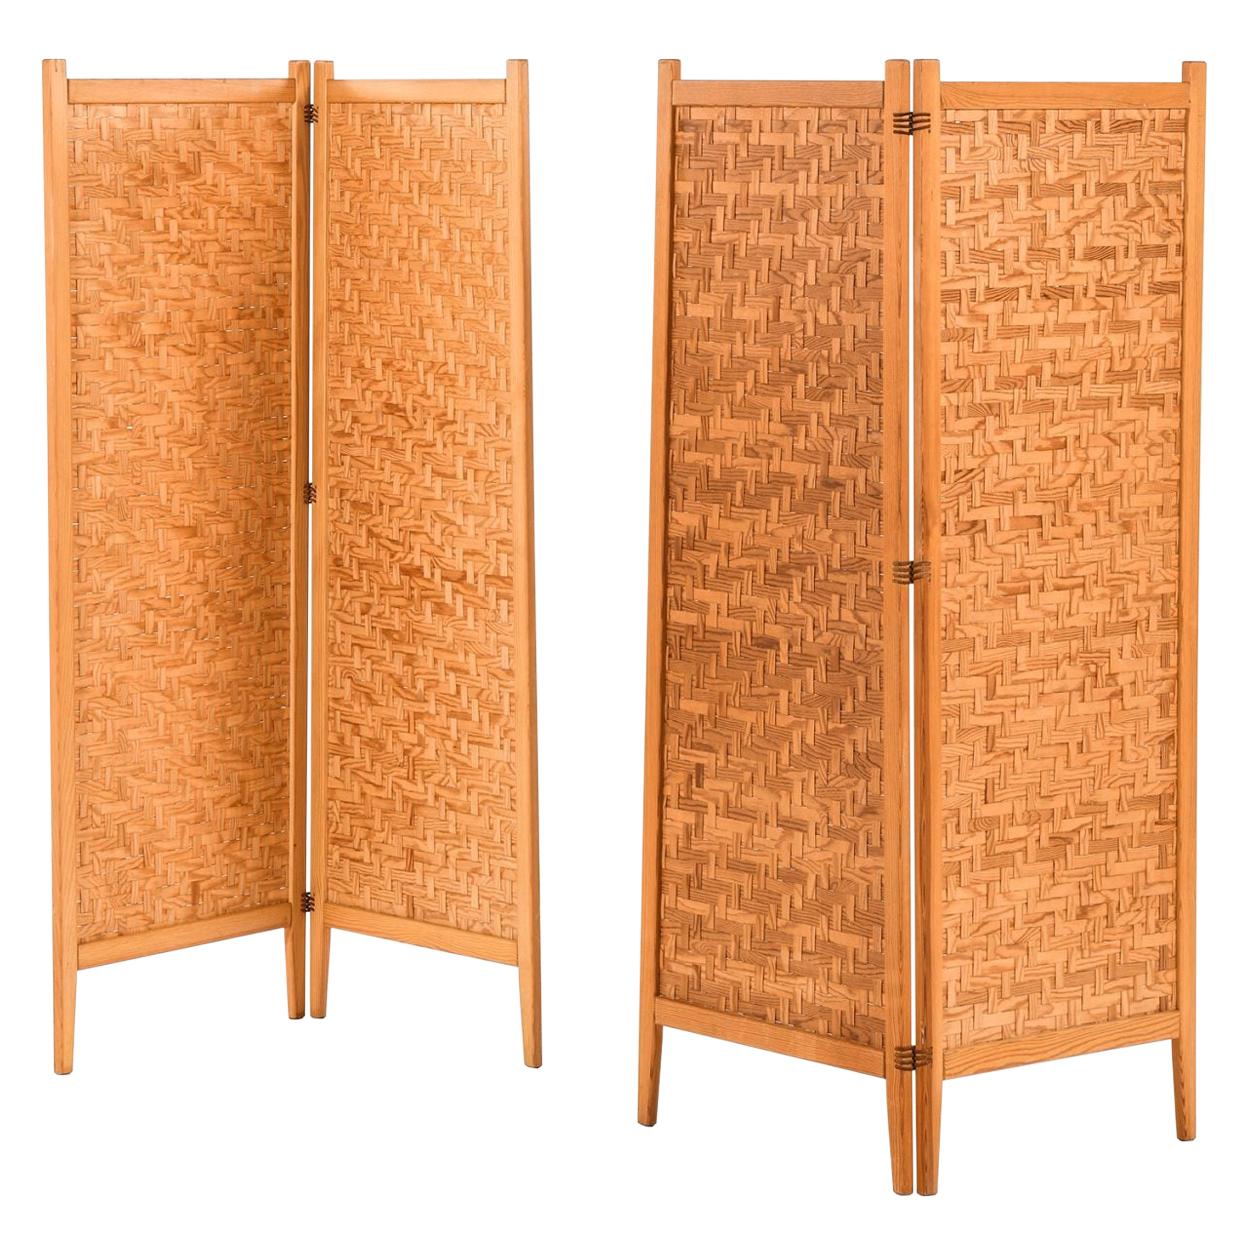 Folding Screens / Room Dividers Produced by Alberts in Tibro, Sweden